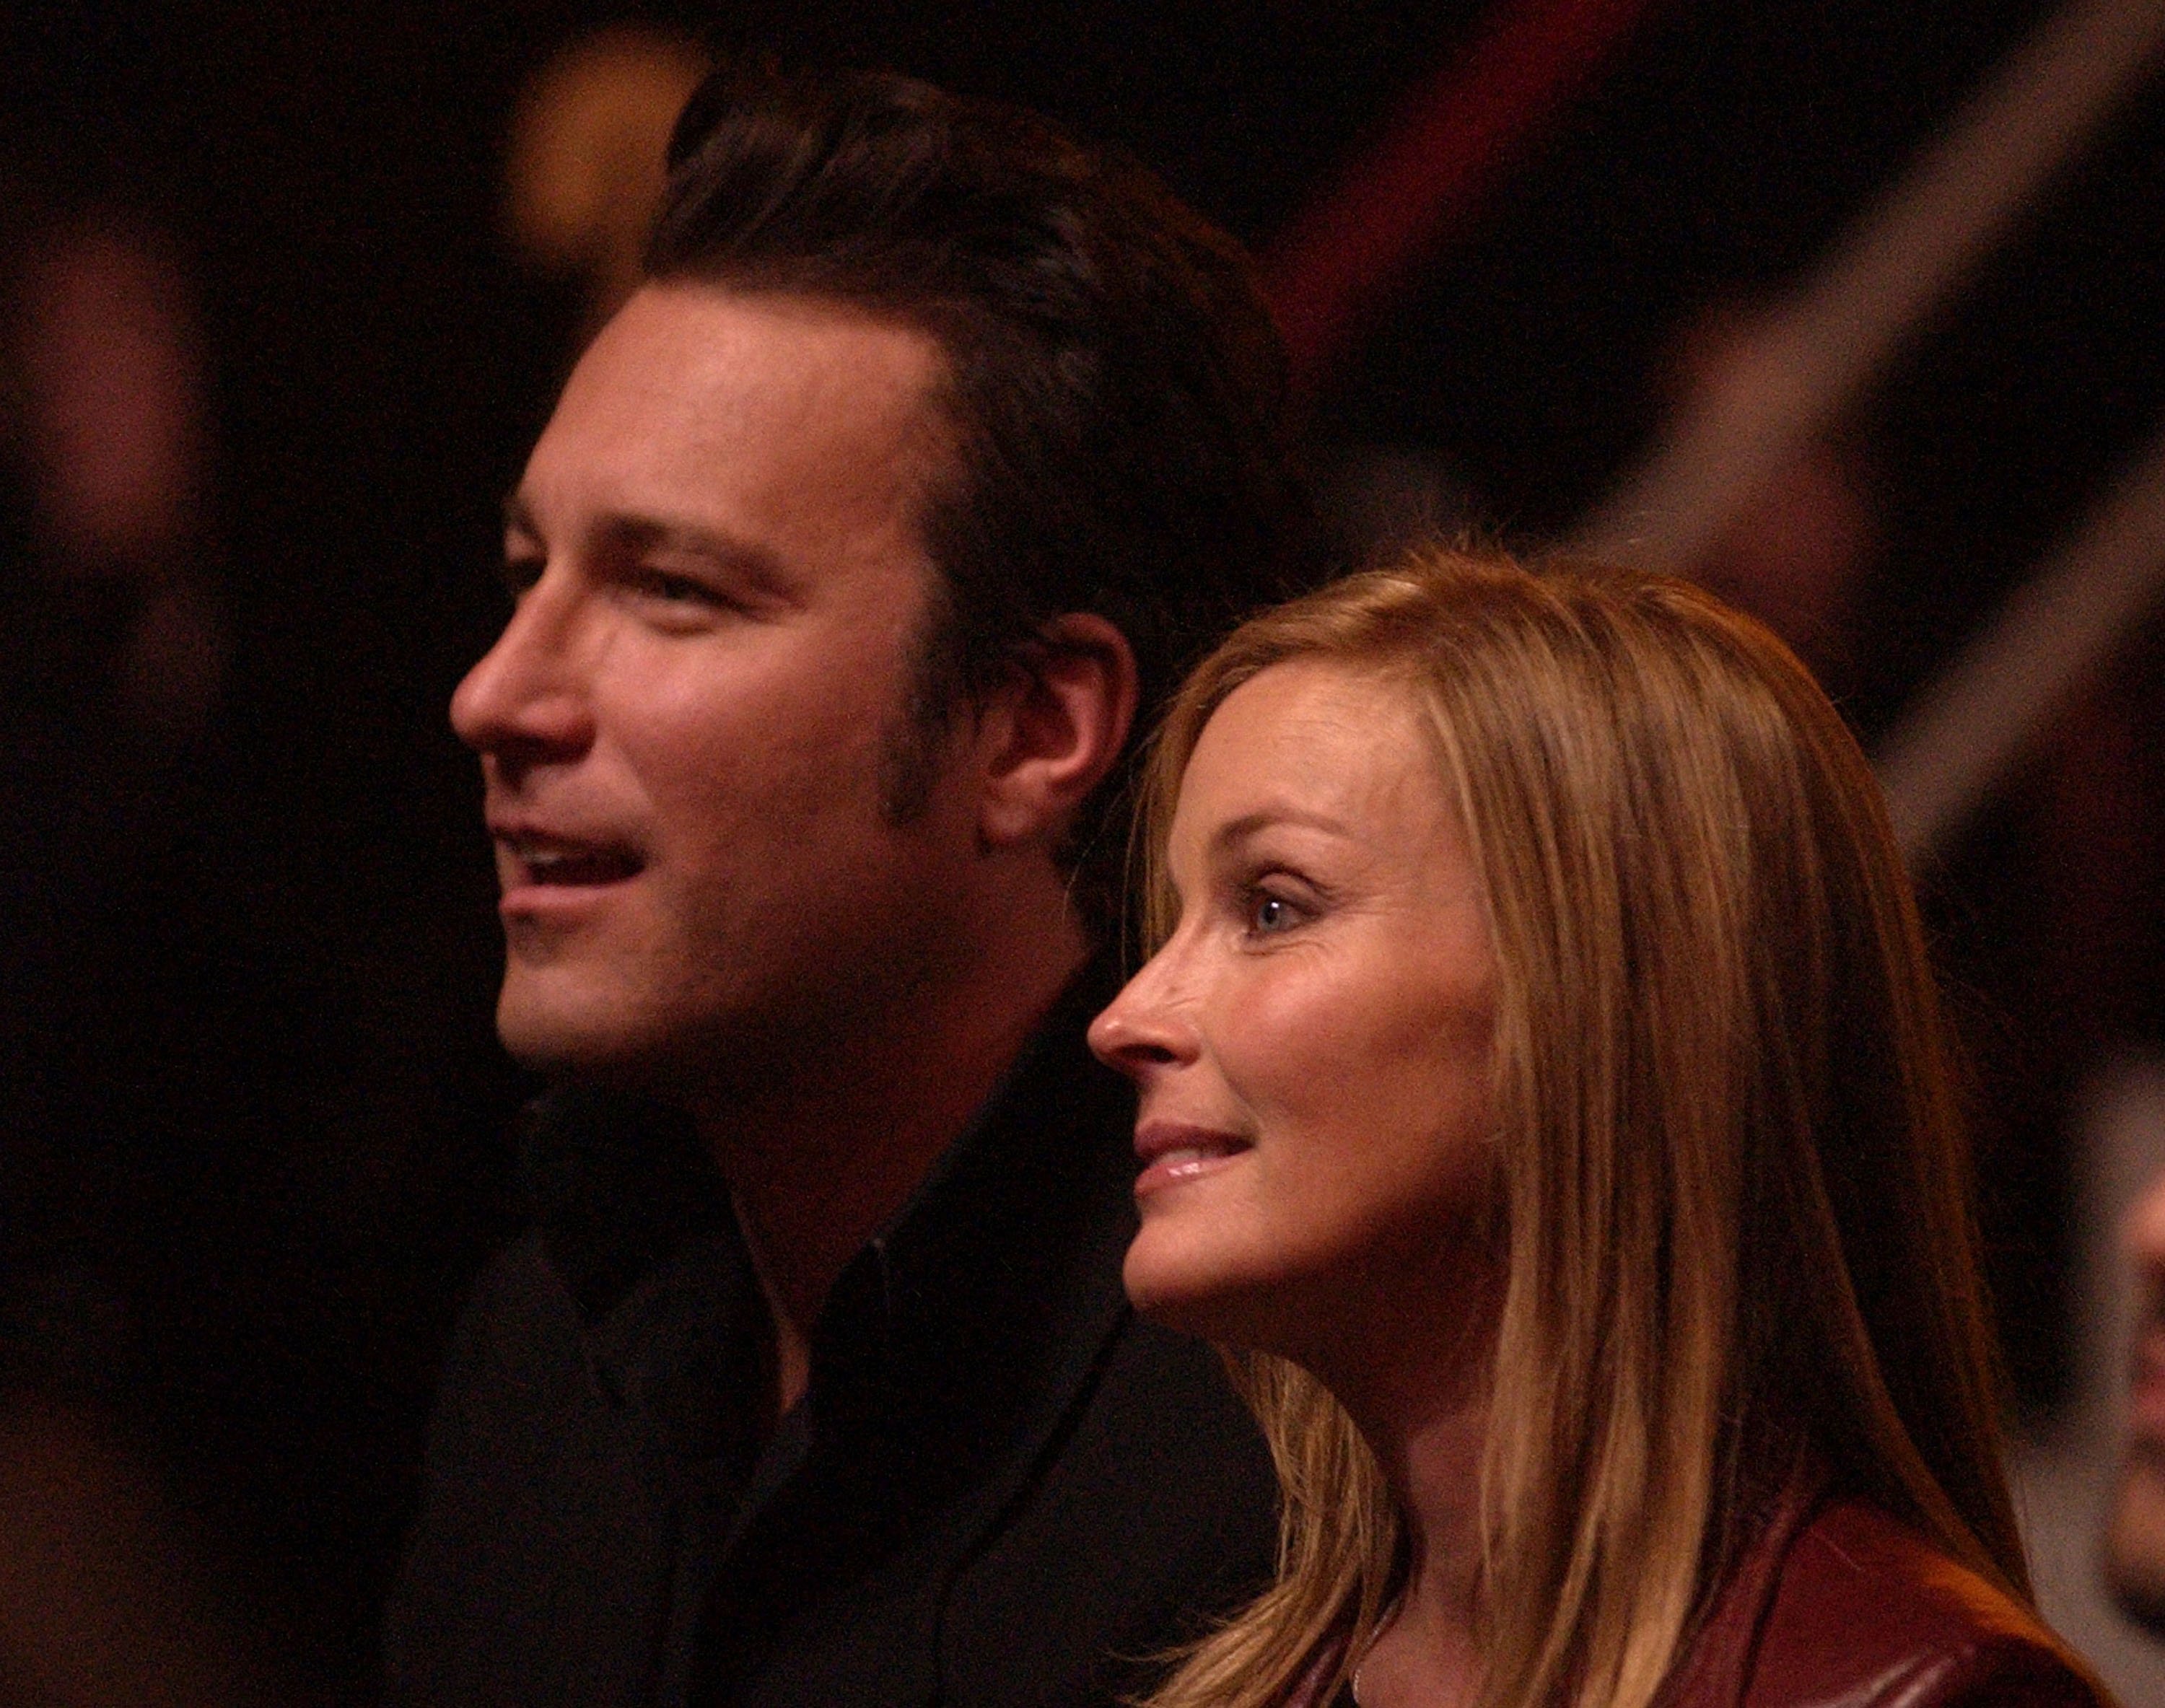 John Corbett and Bo Derek sitting in the audience at the VH1 Big in 2002 Awards. December 4, 2002 | Source: Getty Images 